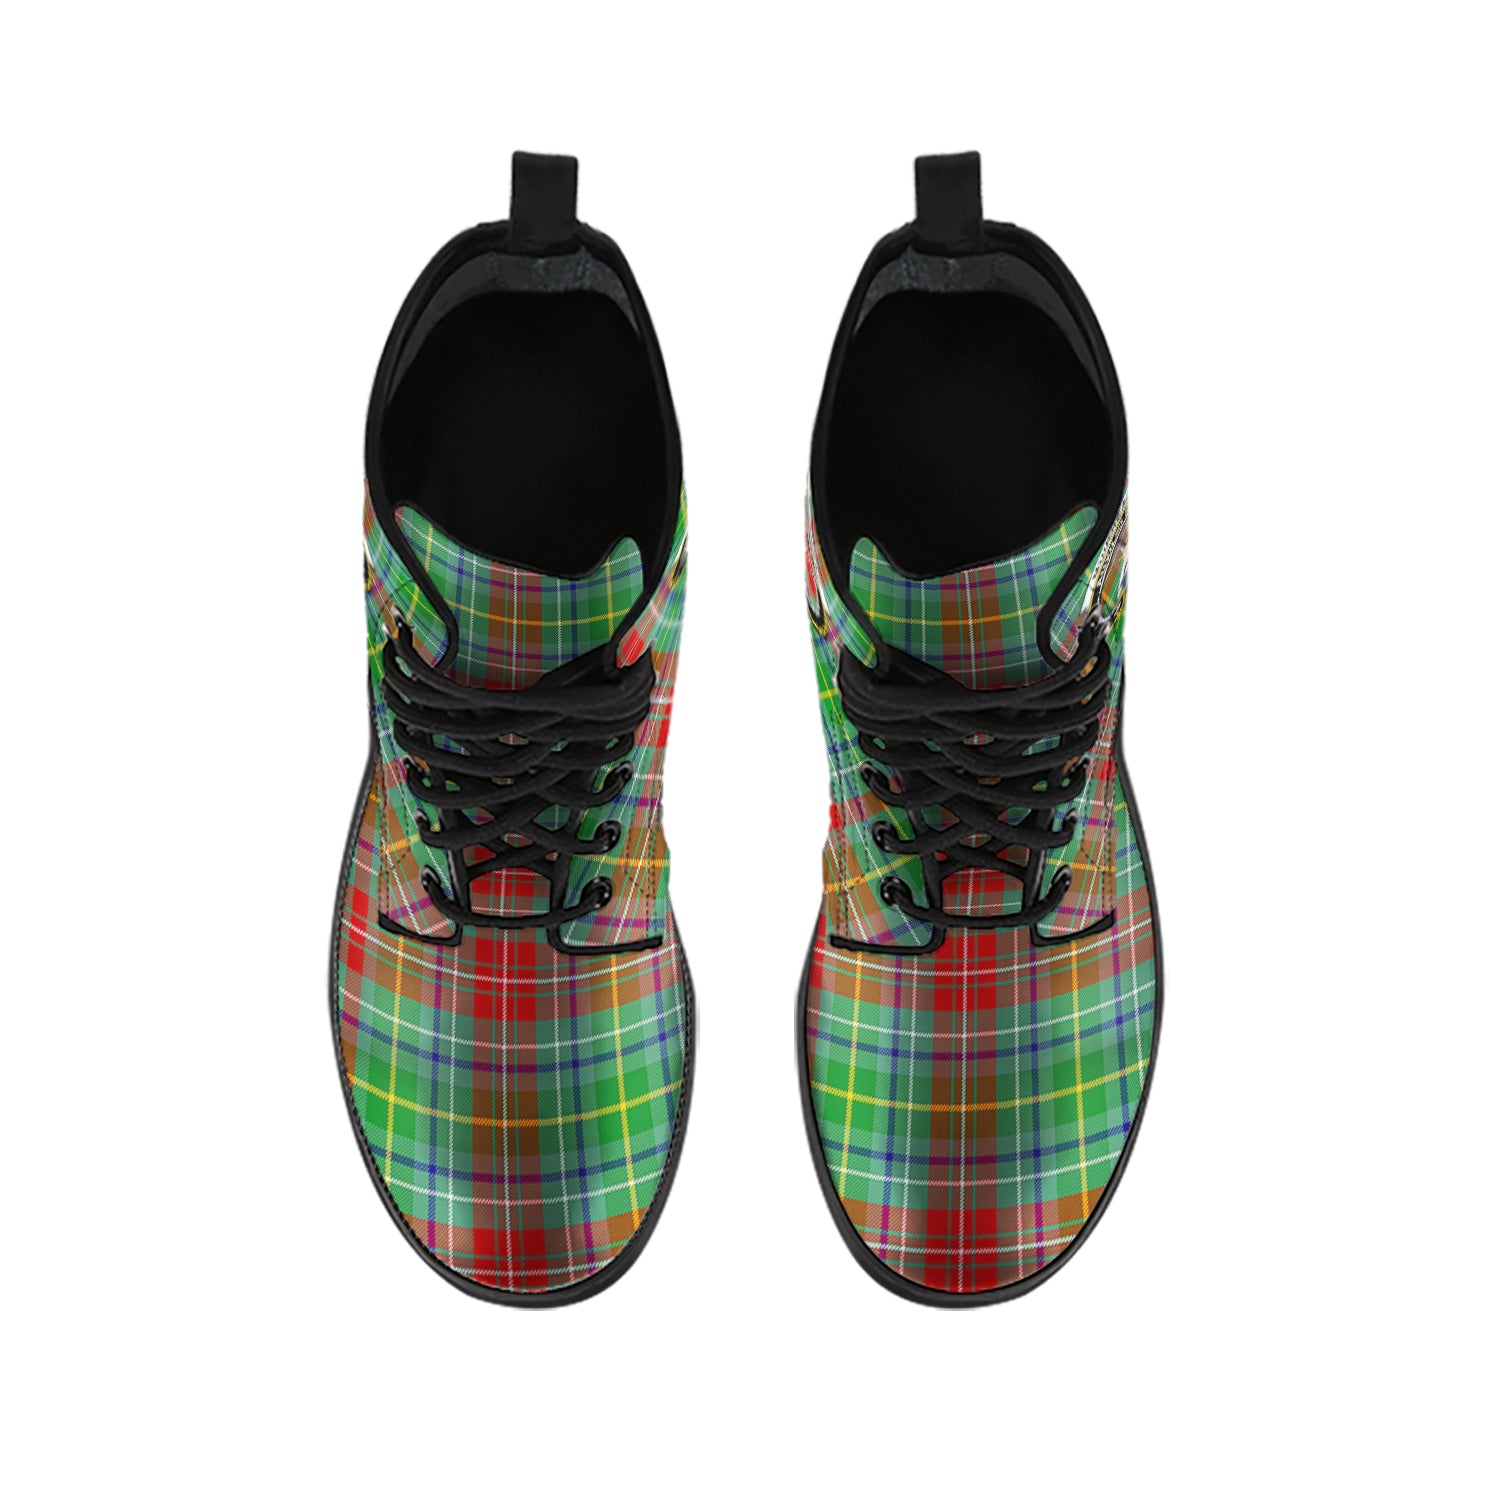 muirhead-tartan-leather-boots-with-family-crest